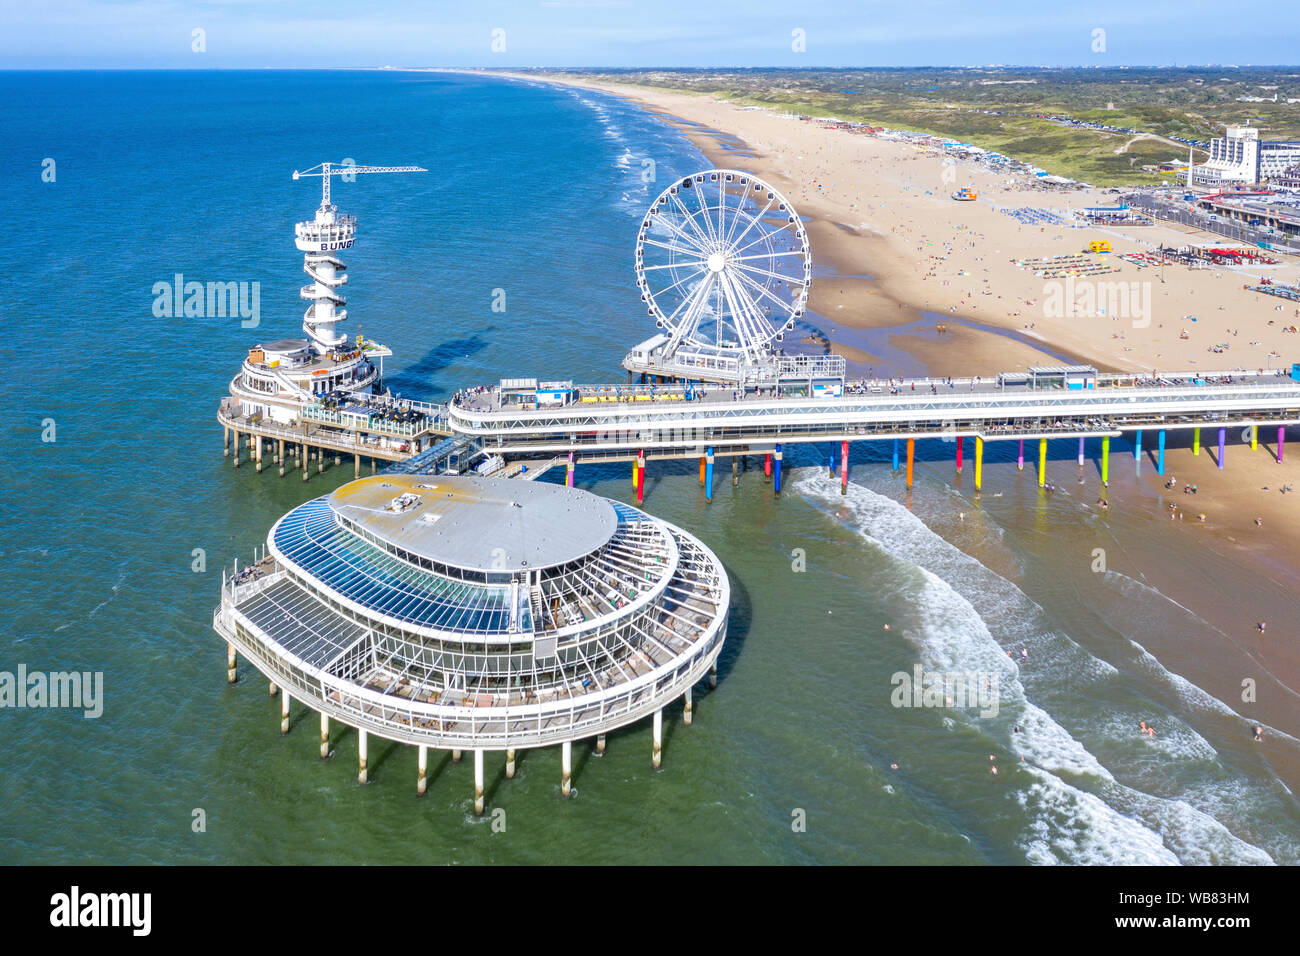 Aerial view of beach and Pier of Scheveningen, Den Haag, The Hague, situated on the North Sea coast, South Holland, The Netherlands, Europe. Stock Photo